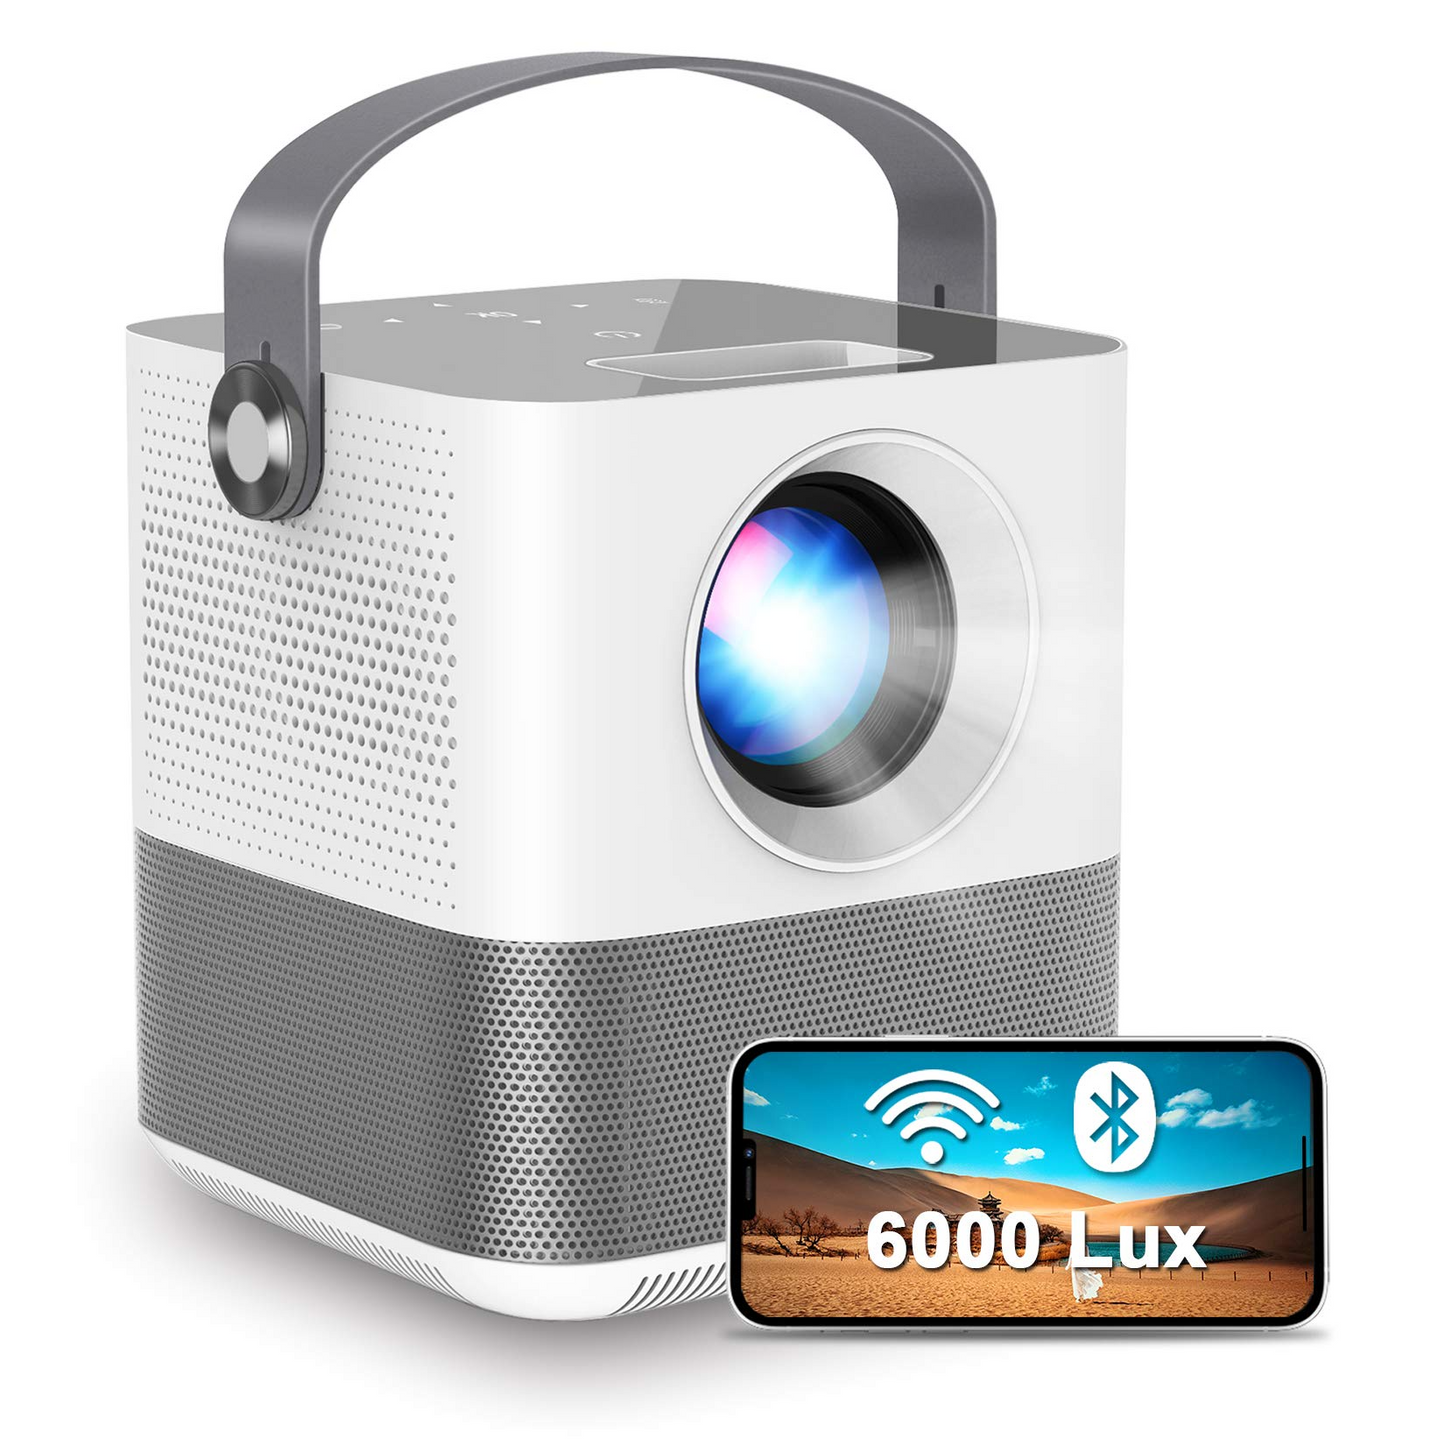 FANGOR WiFi Projector, 200" Display&1080P Supported, 360° Speaker/Bluetooth, 6000L Portable Wireless Mini Projector for Outdoor Movie, Sync Smartphone Screen via WiFi/USB Cable, for iOS/Android